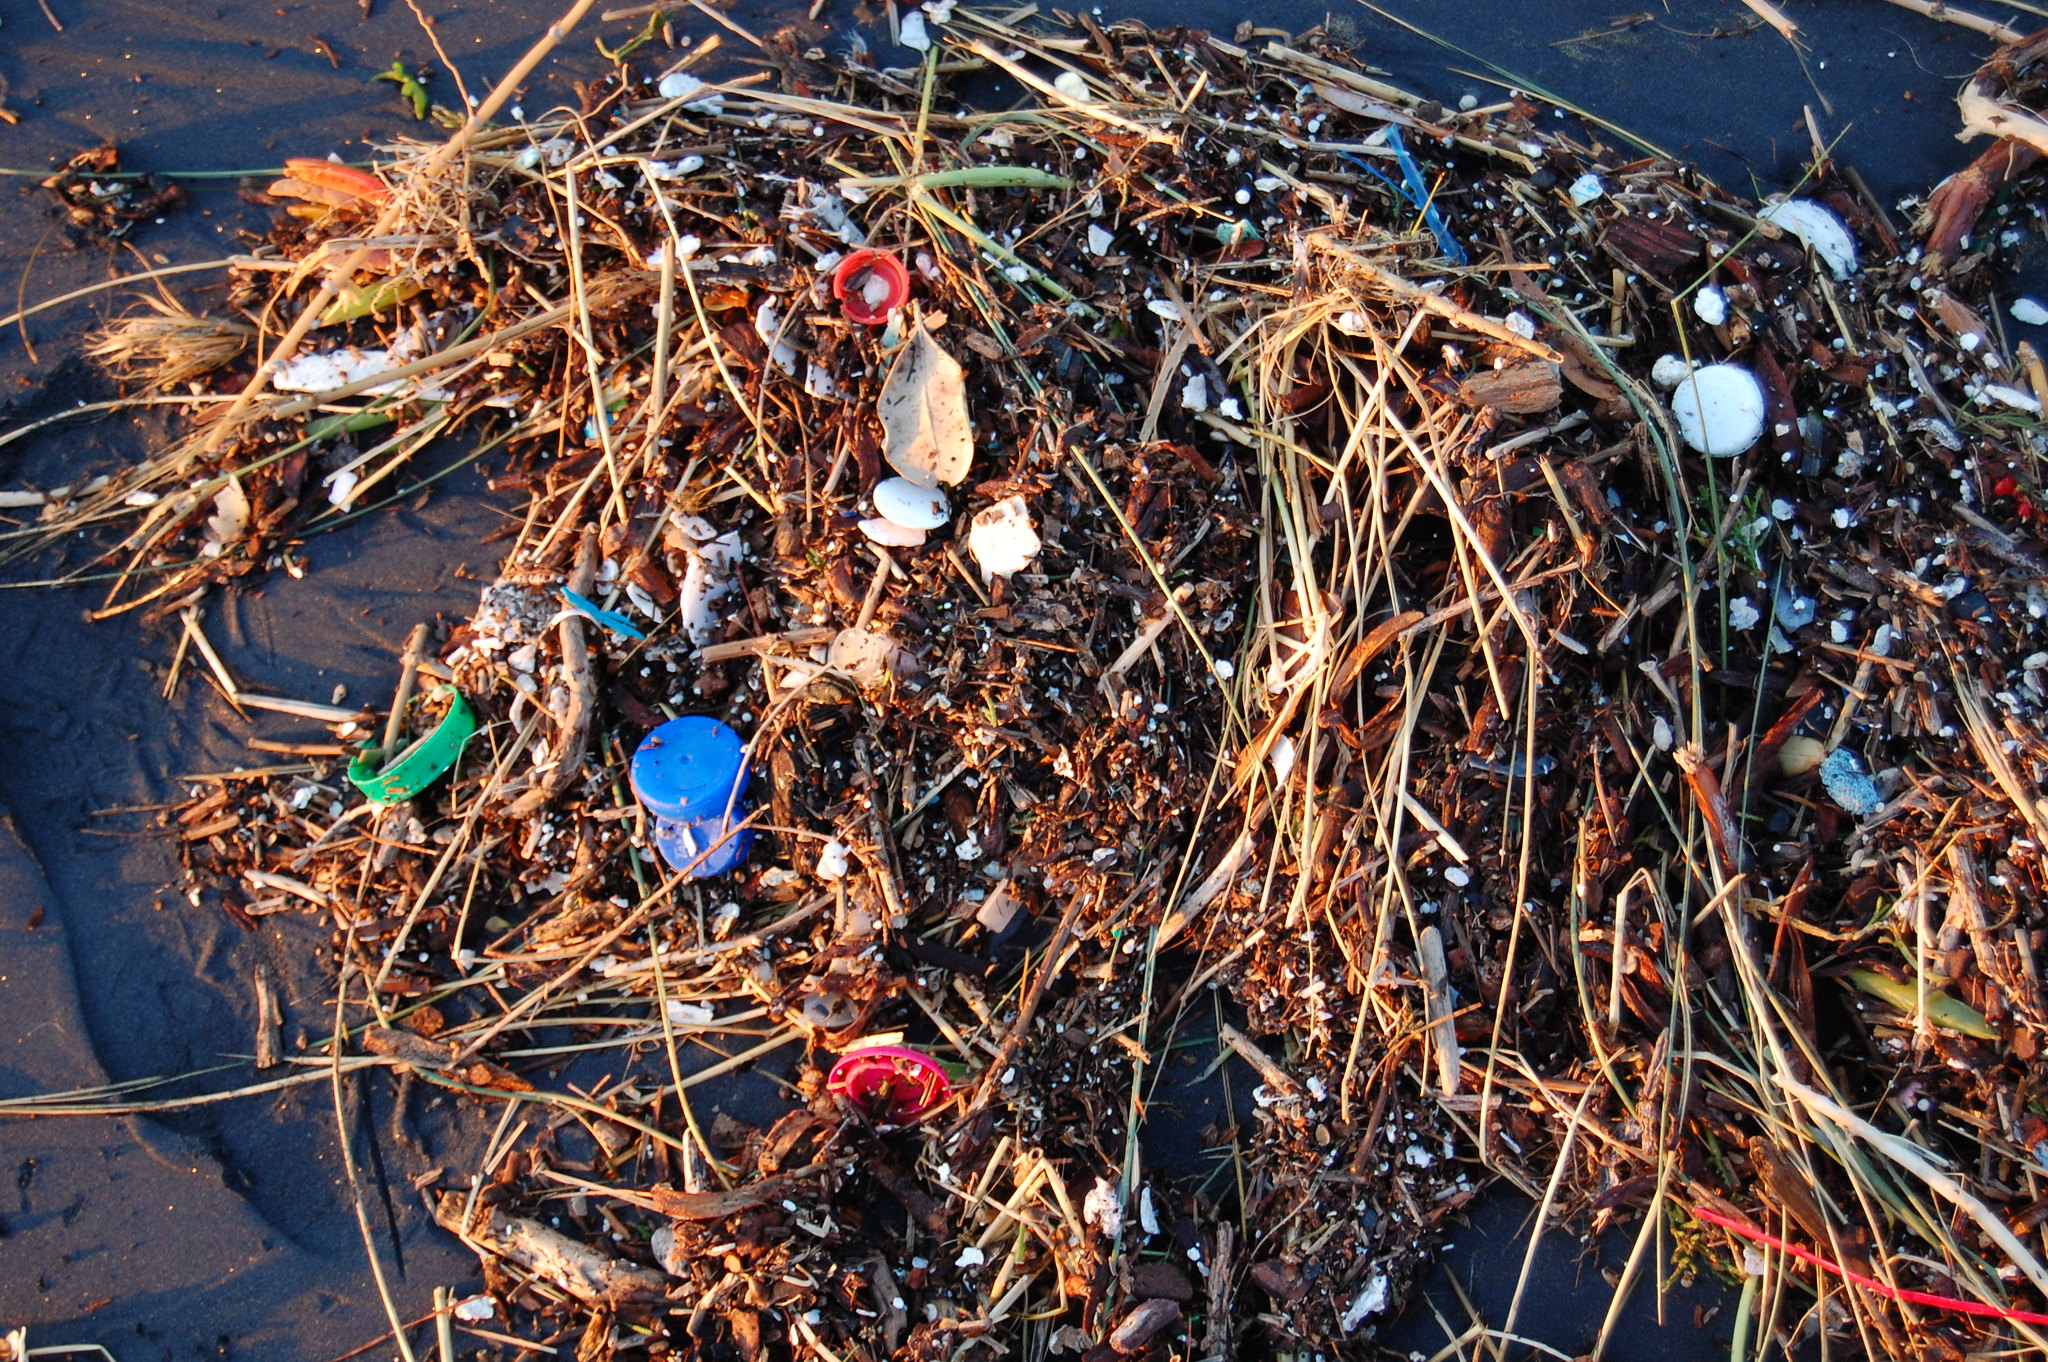 Plastic debris is washed up on a beach.